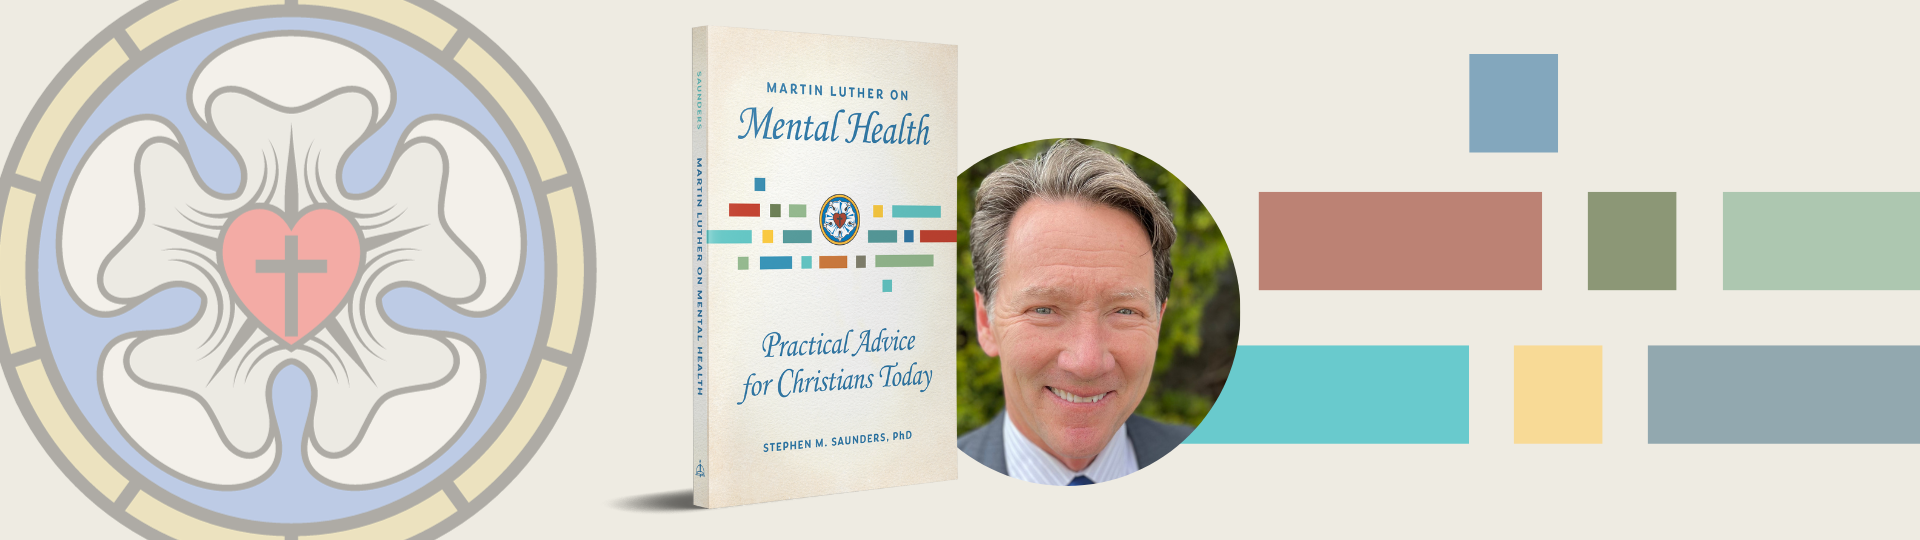 Press Release: Gain a Greater Understanding of Mental Health from a Christian Perspective